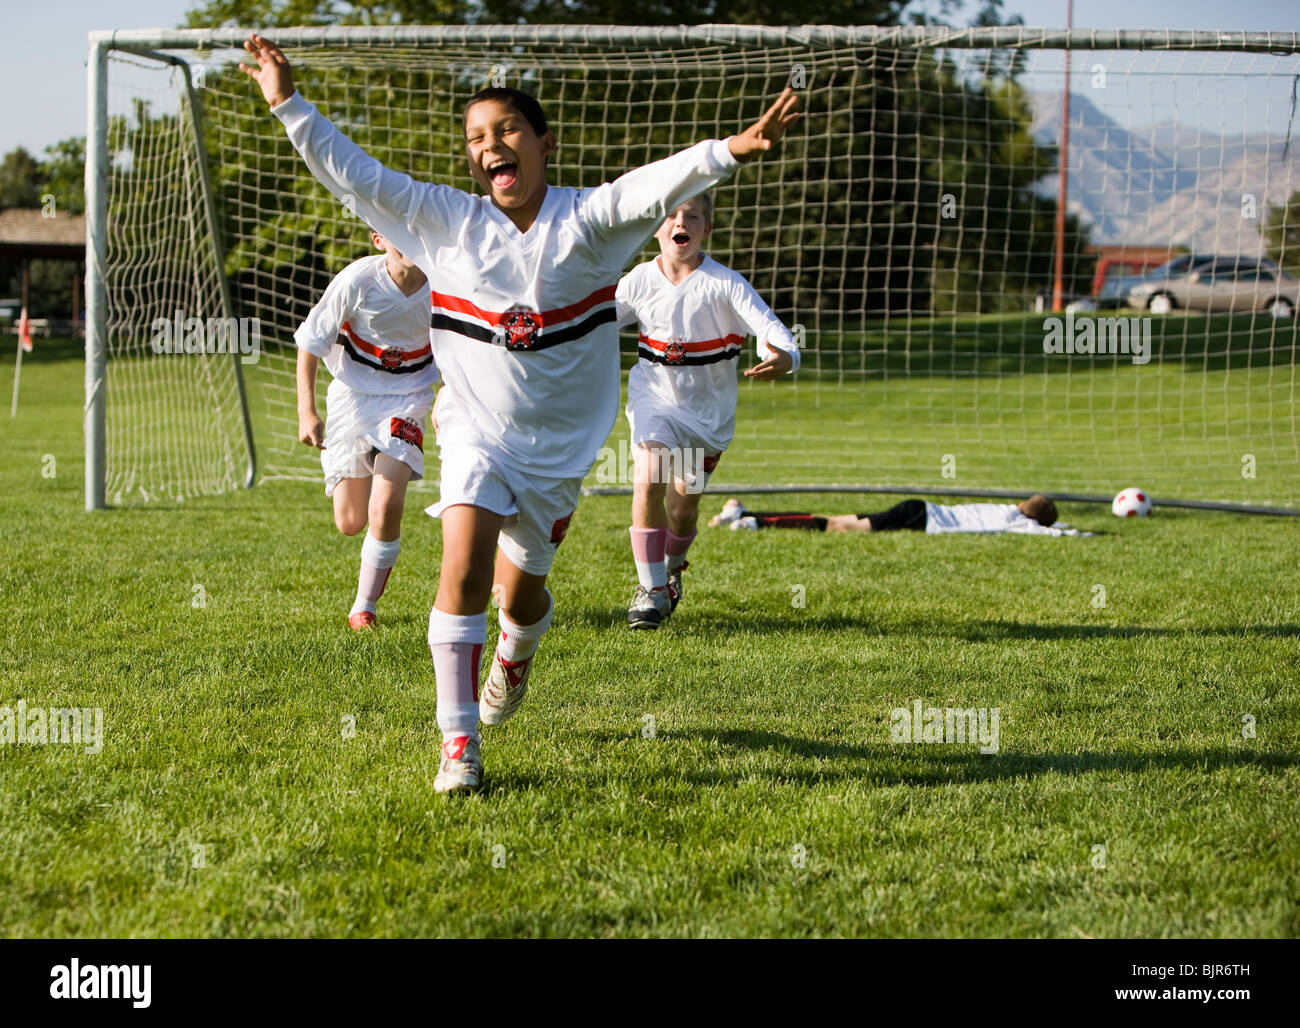 young soccer players Stock Photo